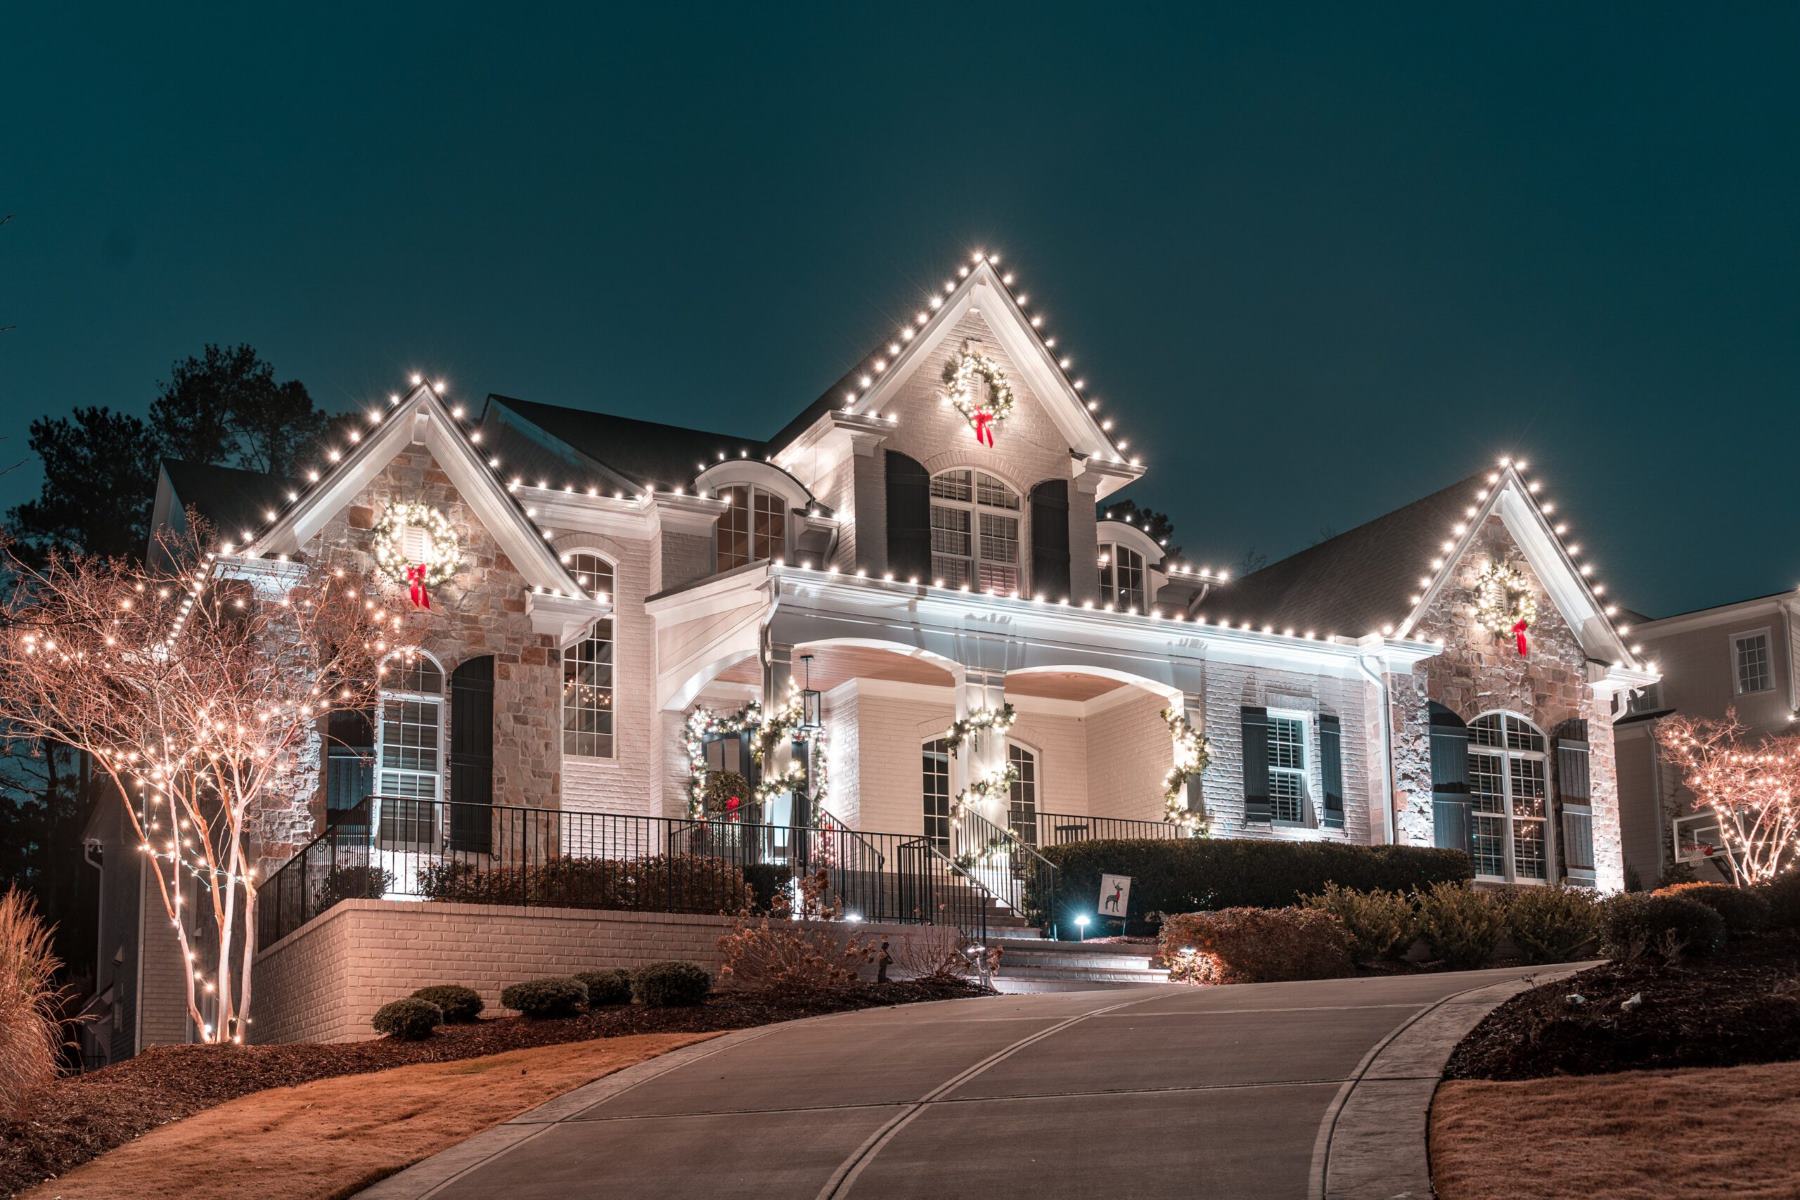 How To Design Christmas Lights On A House